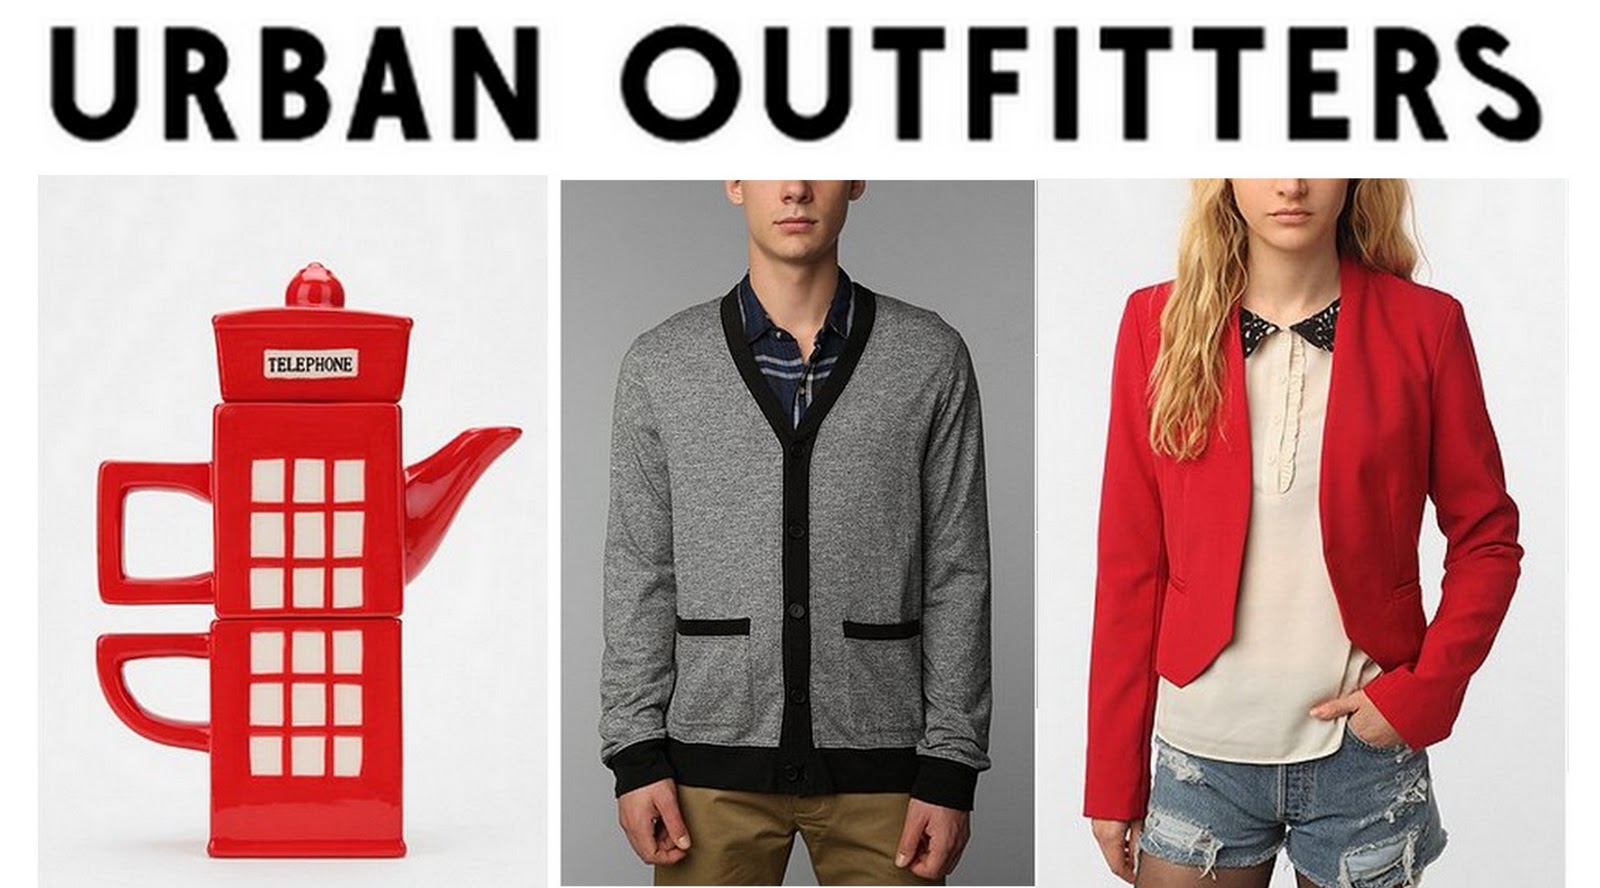 Site: http://www.urbanoutfitters.com